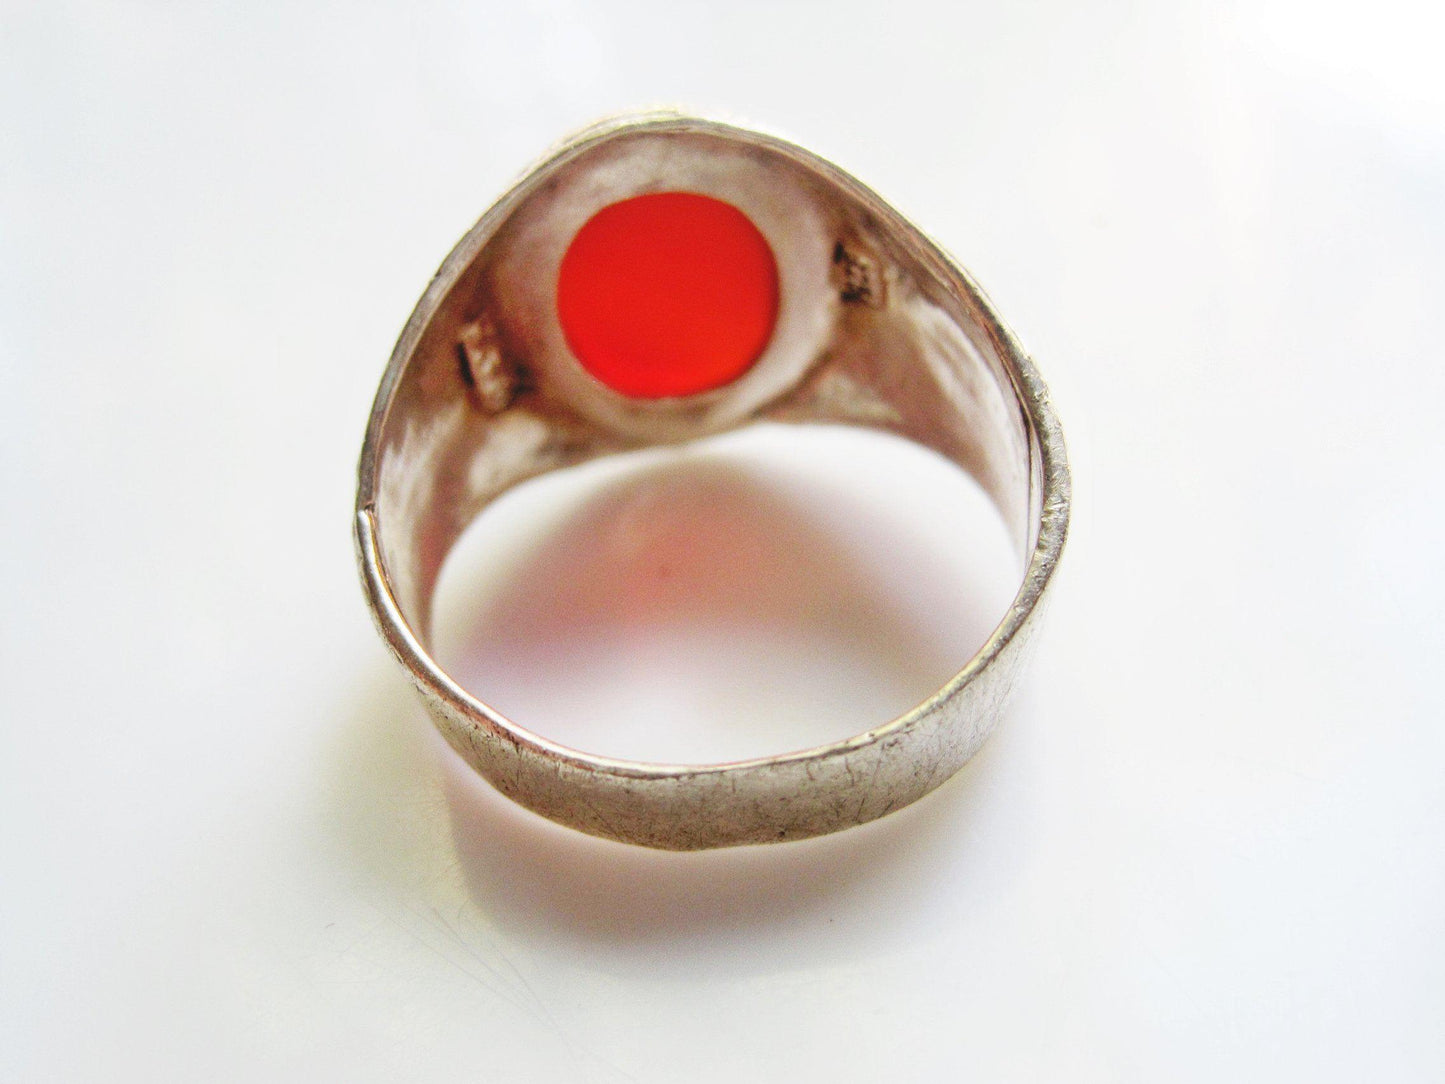 Vintage Carnelian Ring for a Man Made of Sterling Silver - Anteeka